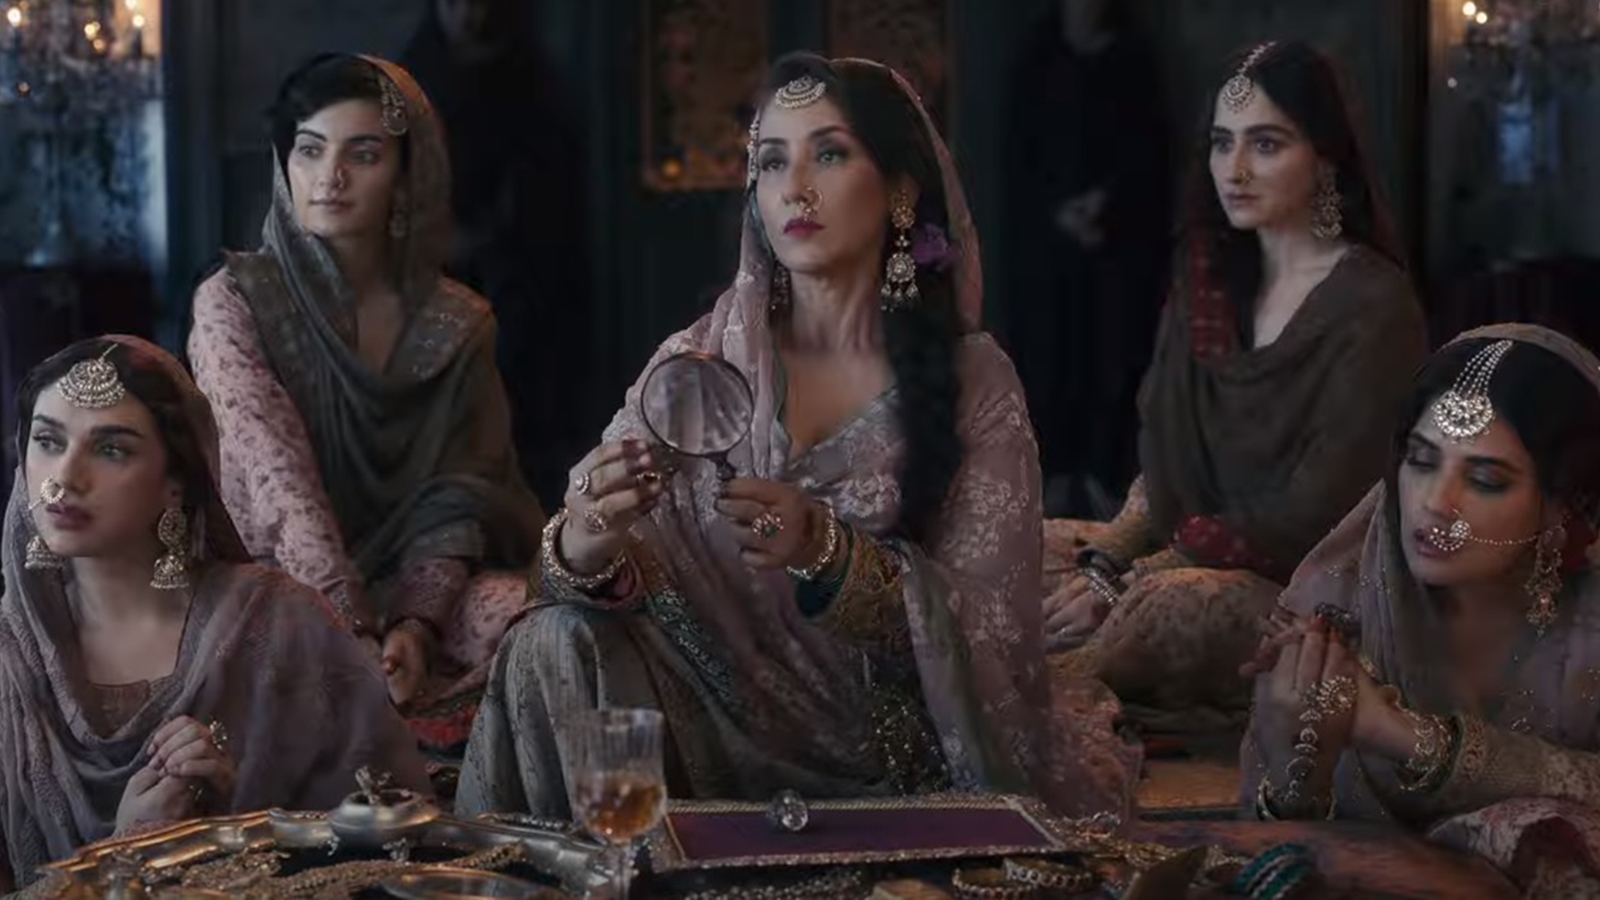 android, heeramandi trailer: sanjay leela bhansali takes his audience to a picture-perfect world where even tragedy appears beautiful